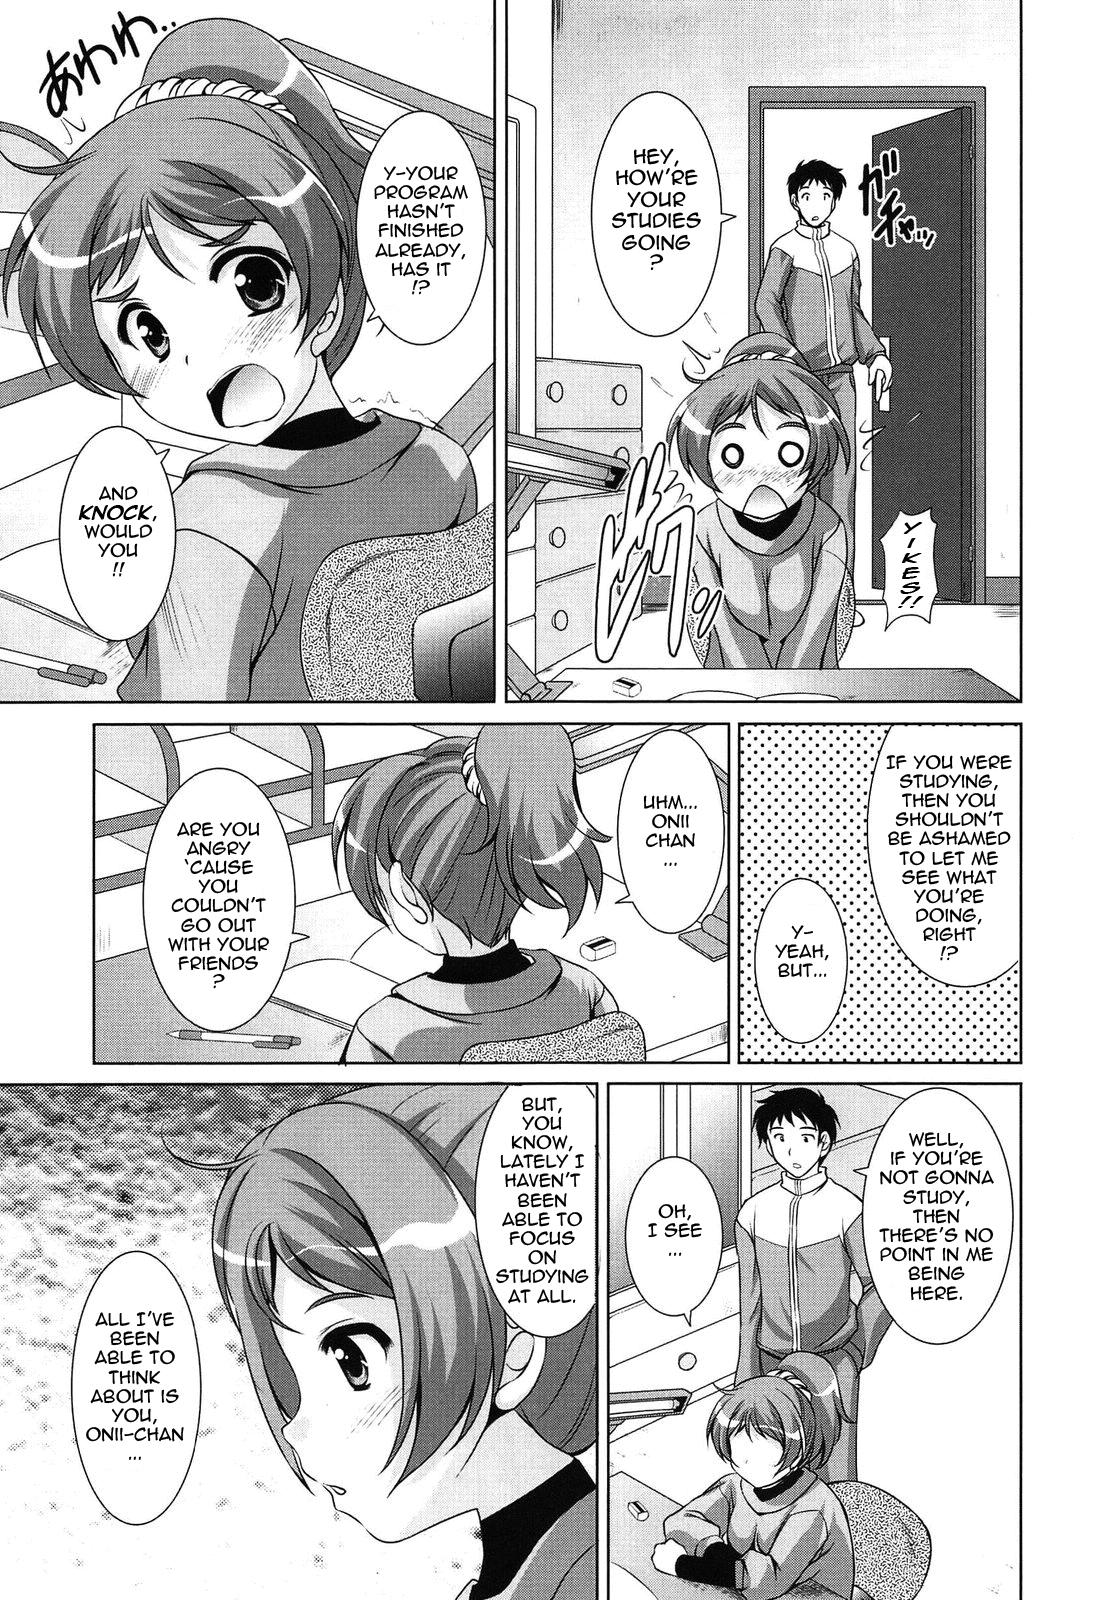 Face Fucking Younger Girls! Celebration Ch. 1-7 Free Fuck - Page 11